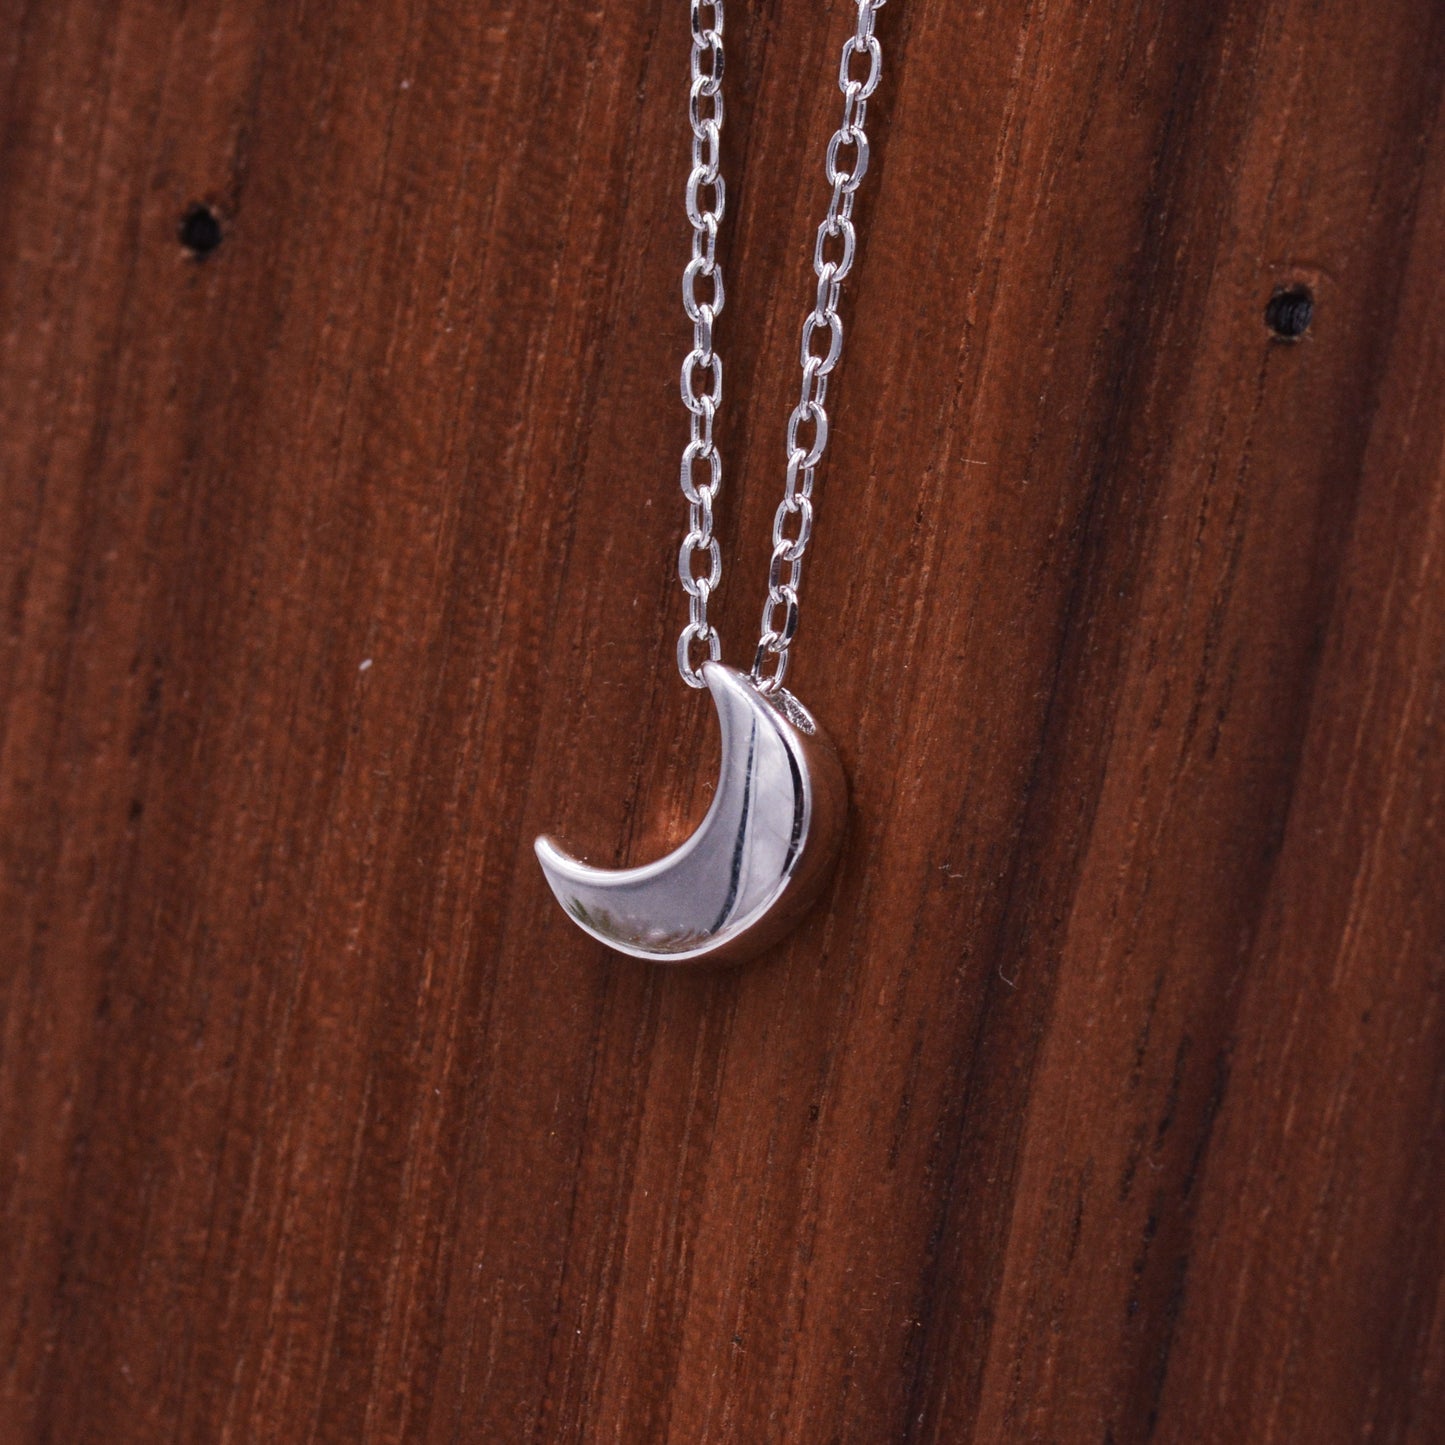 Sterling Silver Tiny Little Crescent Moon Pendant Necklace, Delicate Celestial Jewellery, Minimalist